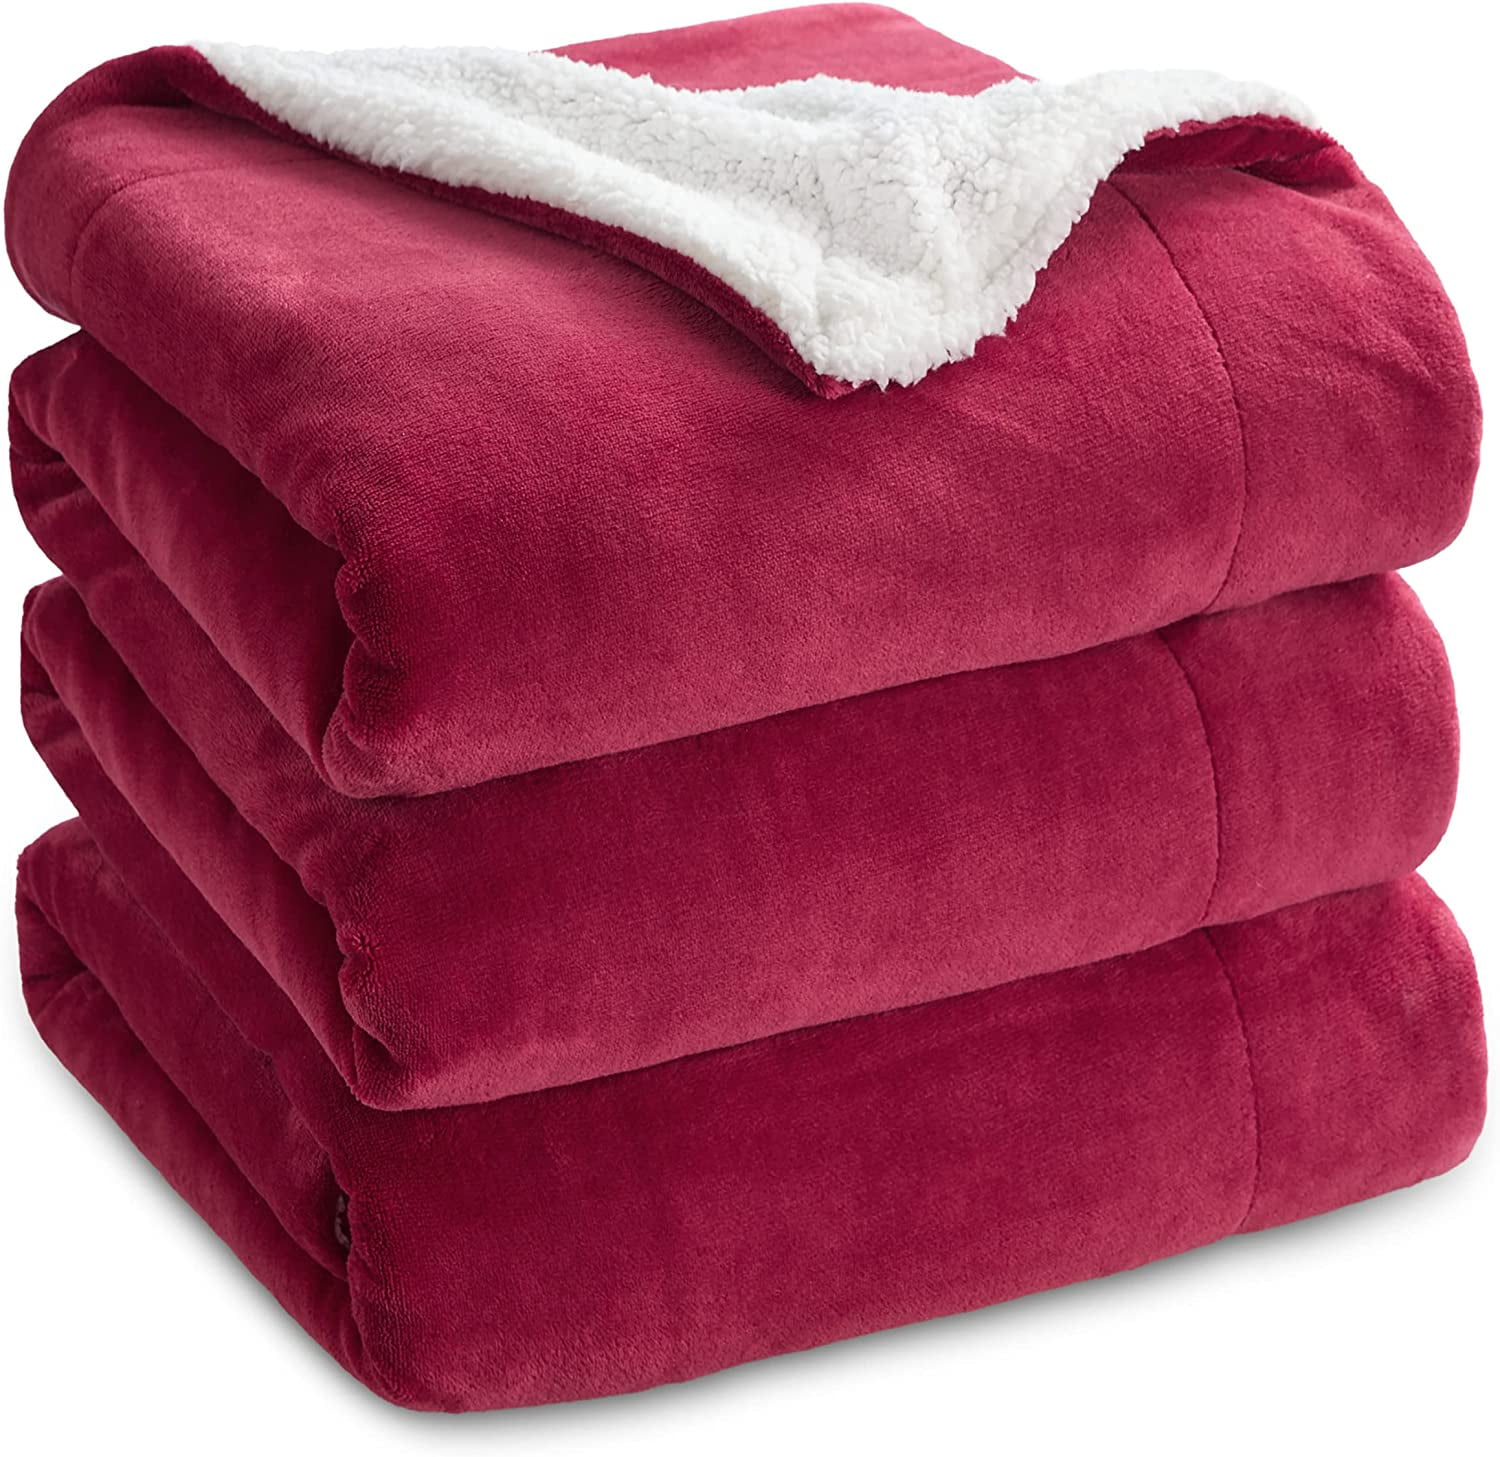 Bedsure Sherpa Fleece King Blanket Red - Thick Warm Blankets, Soft